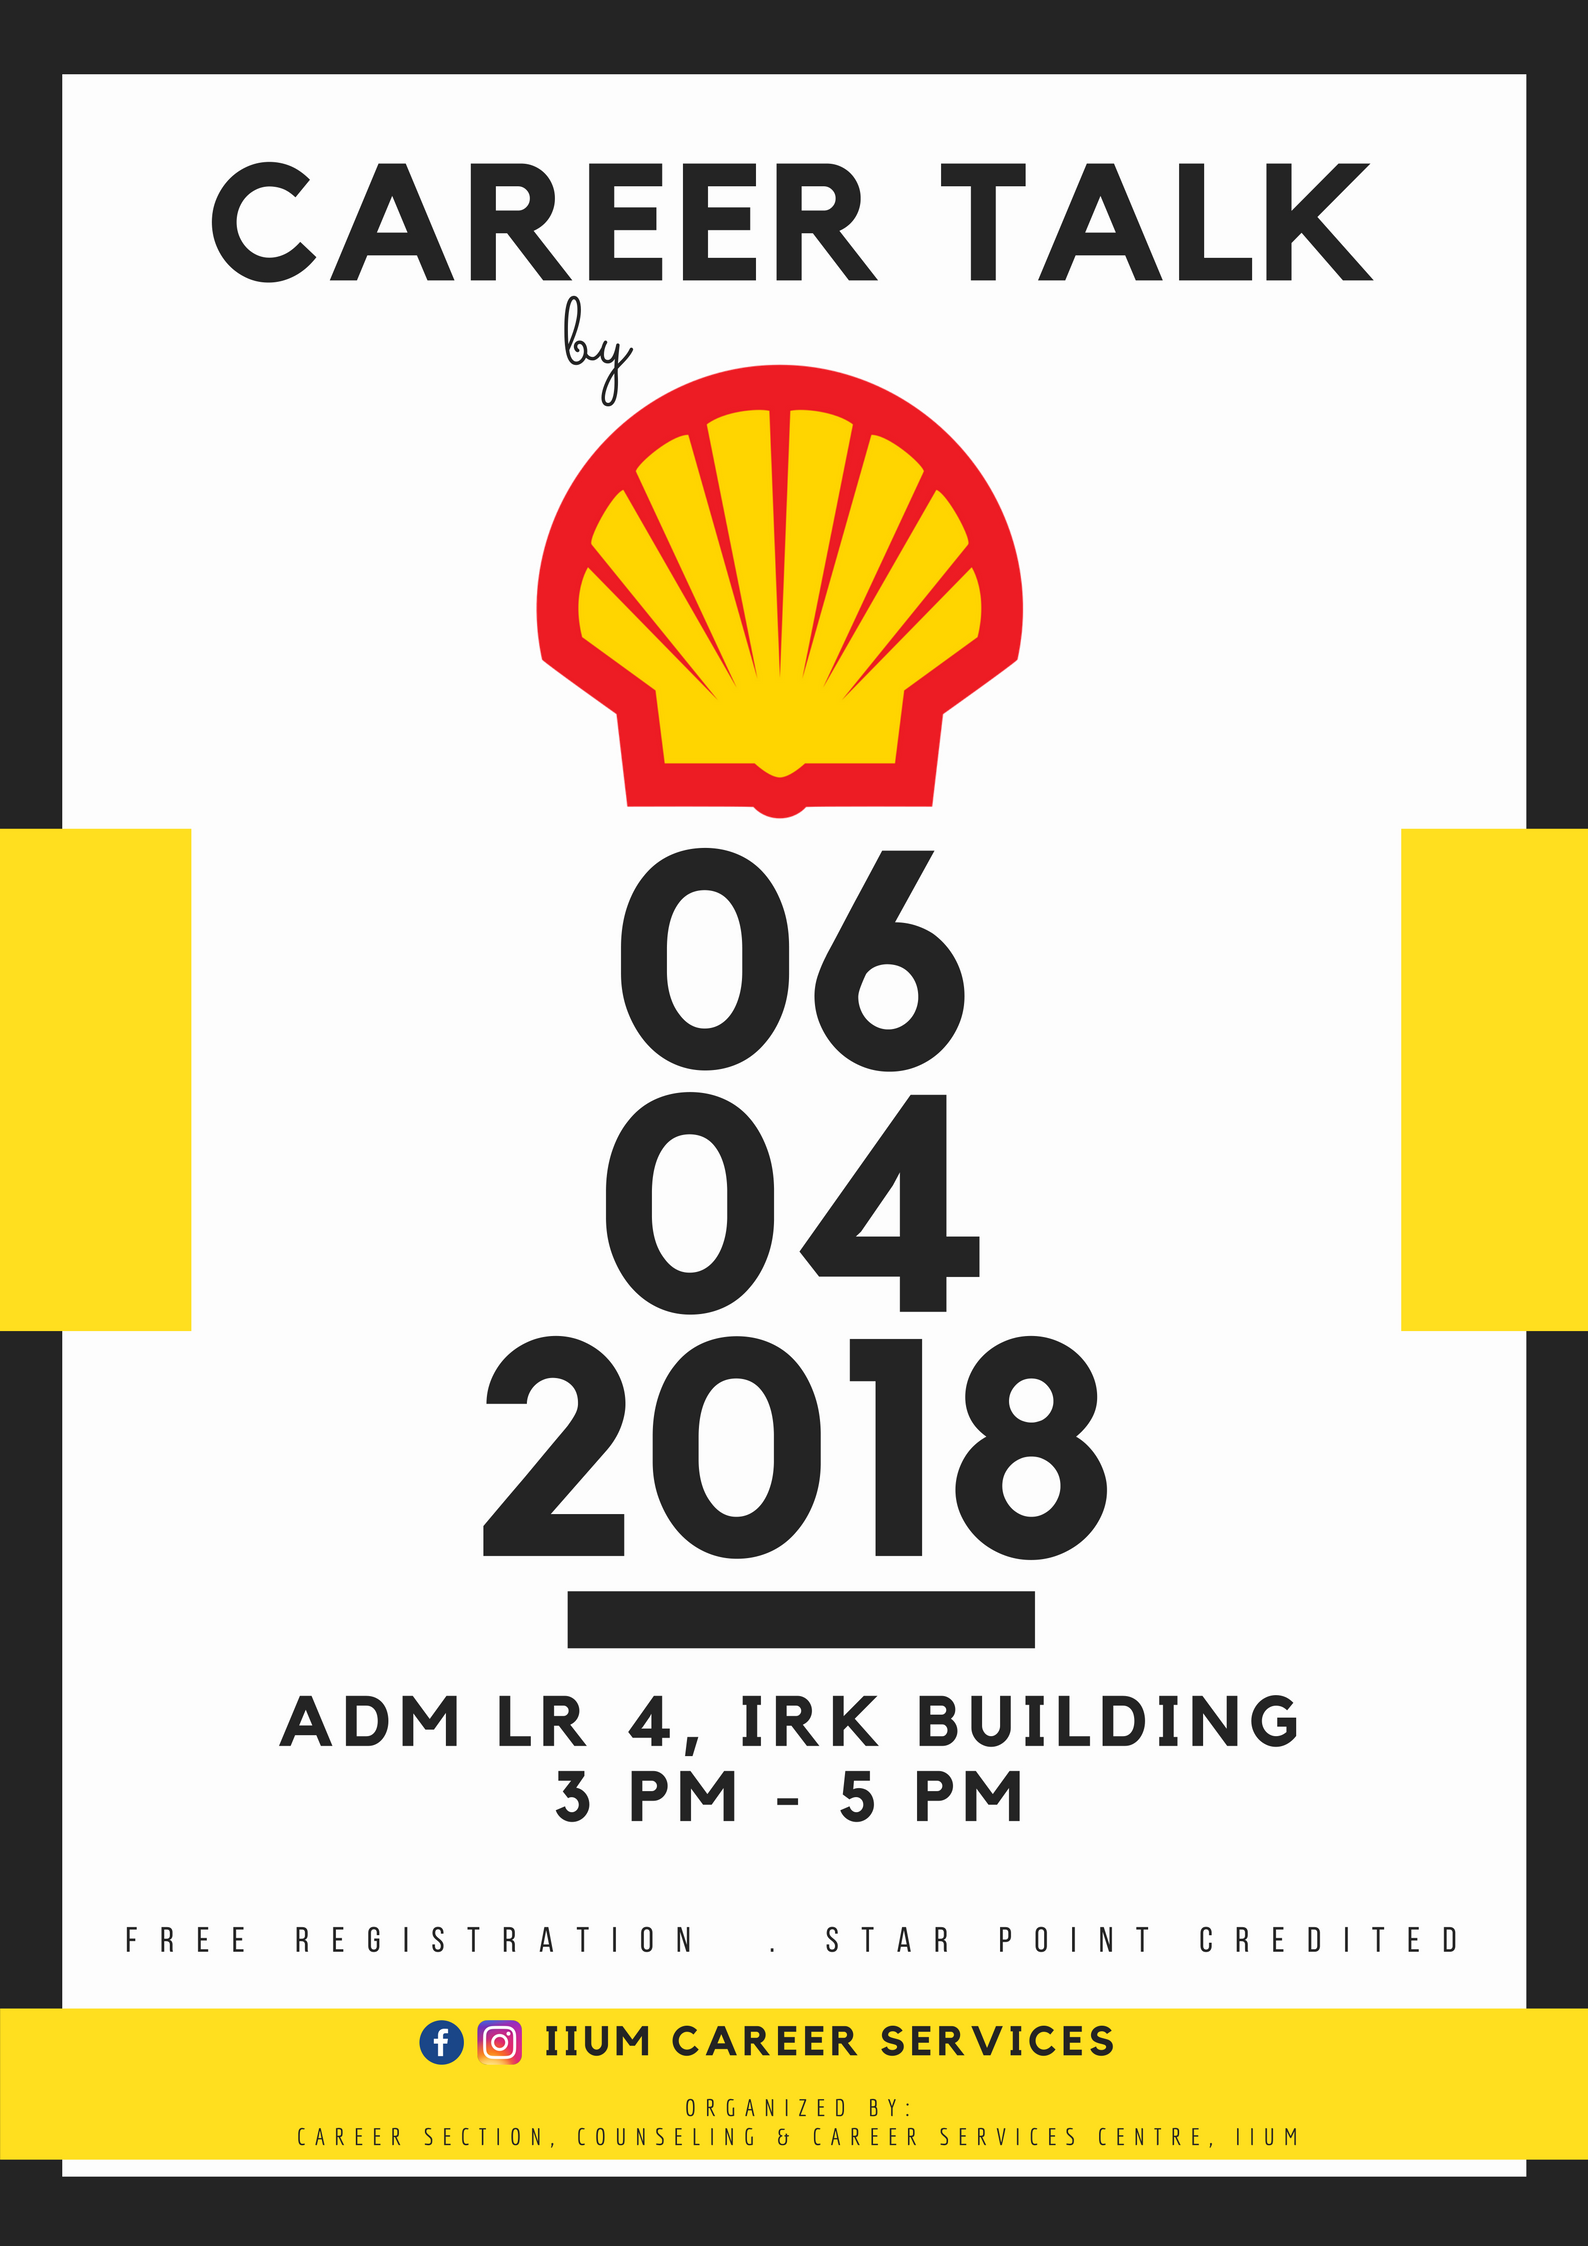 CAREER TALK BY SHELL